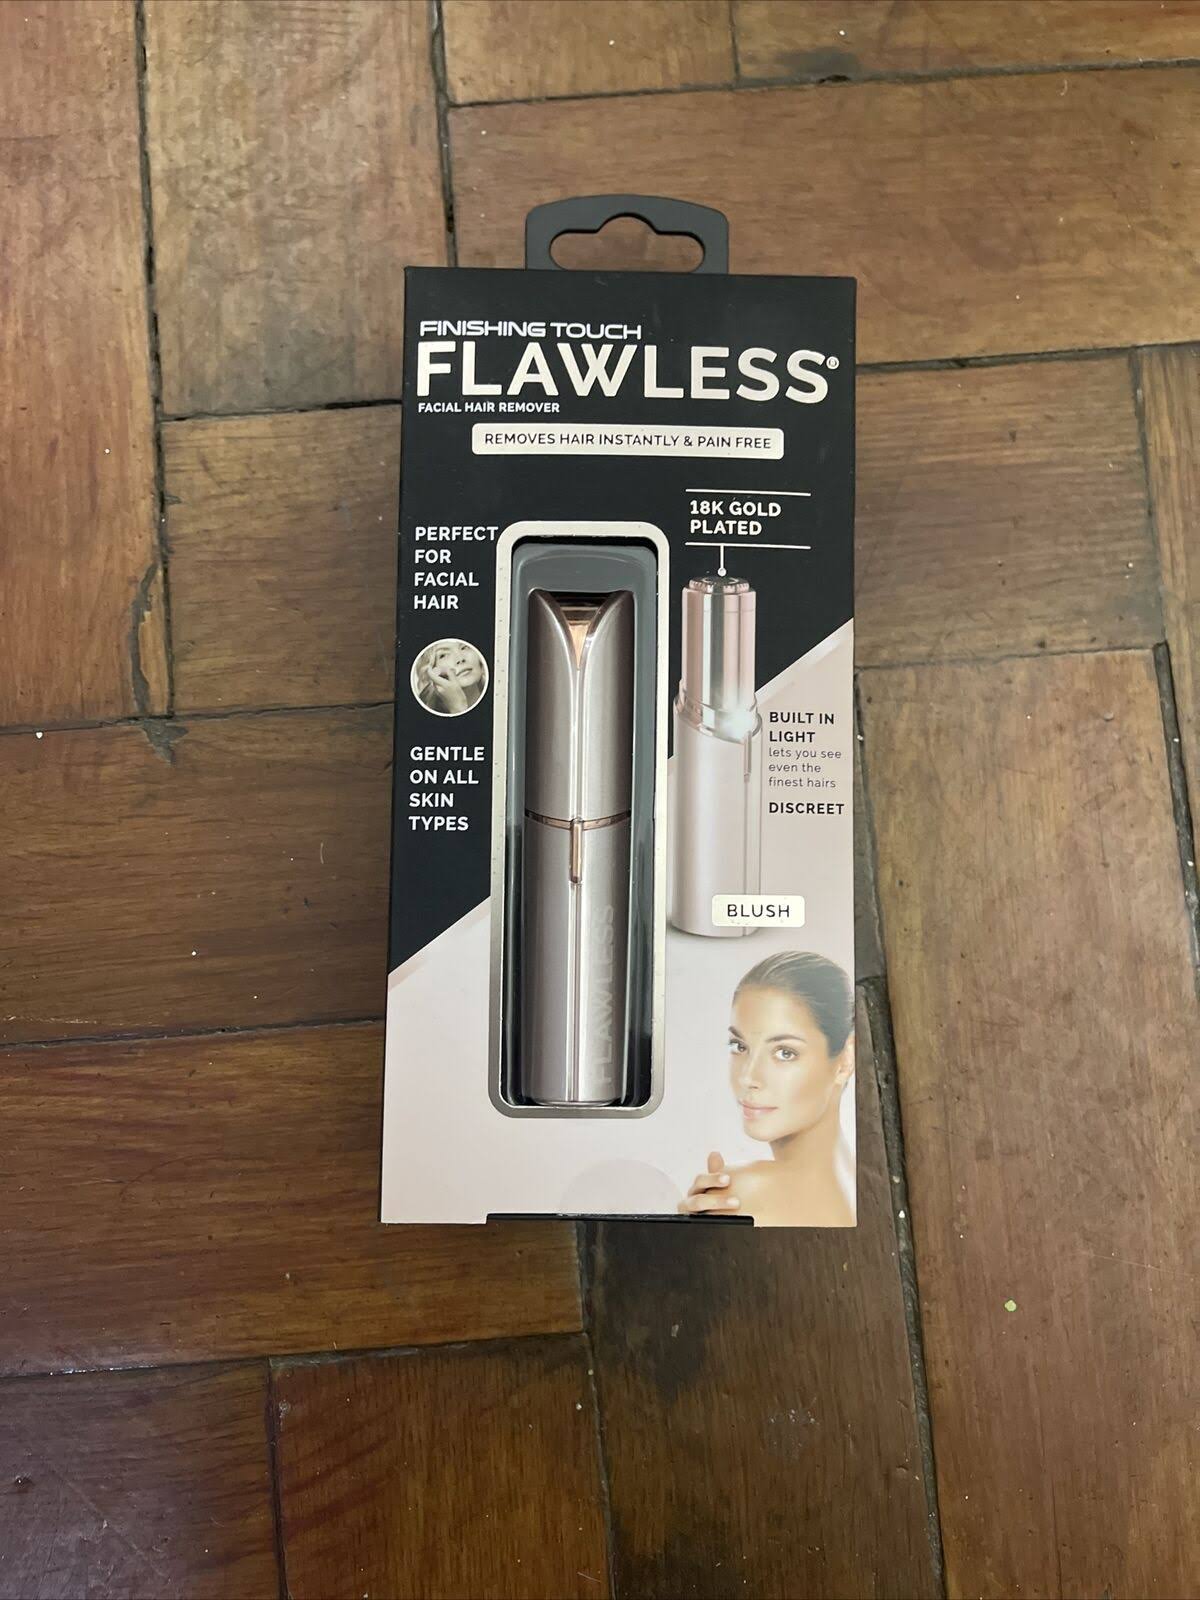 JML Brand New Sealed Flawless Facial Hair Remover Blush Edition